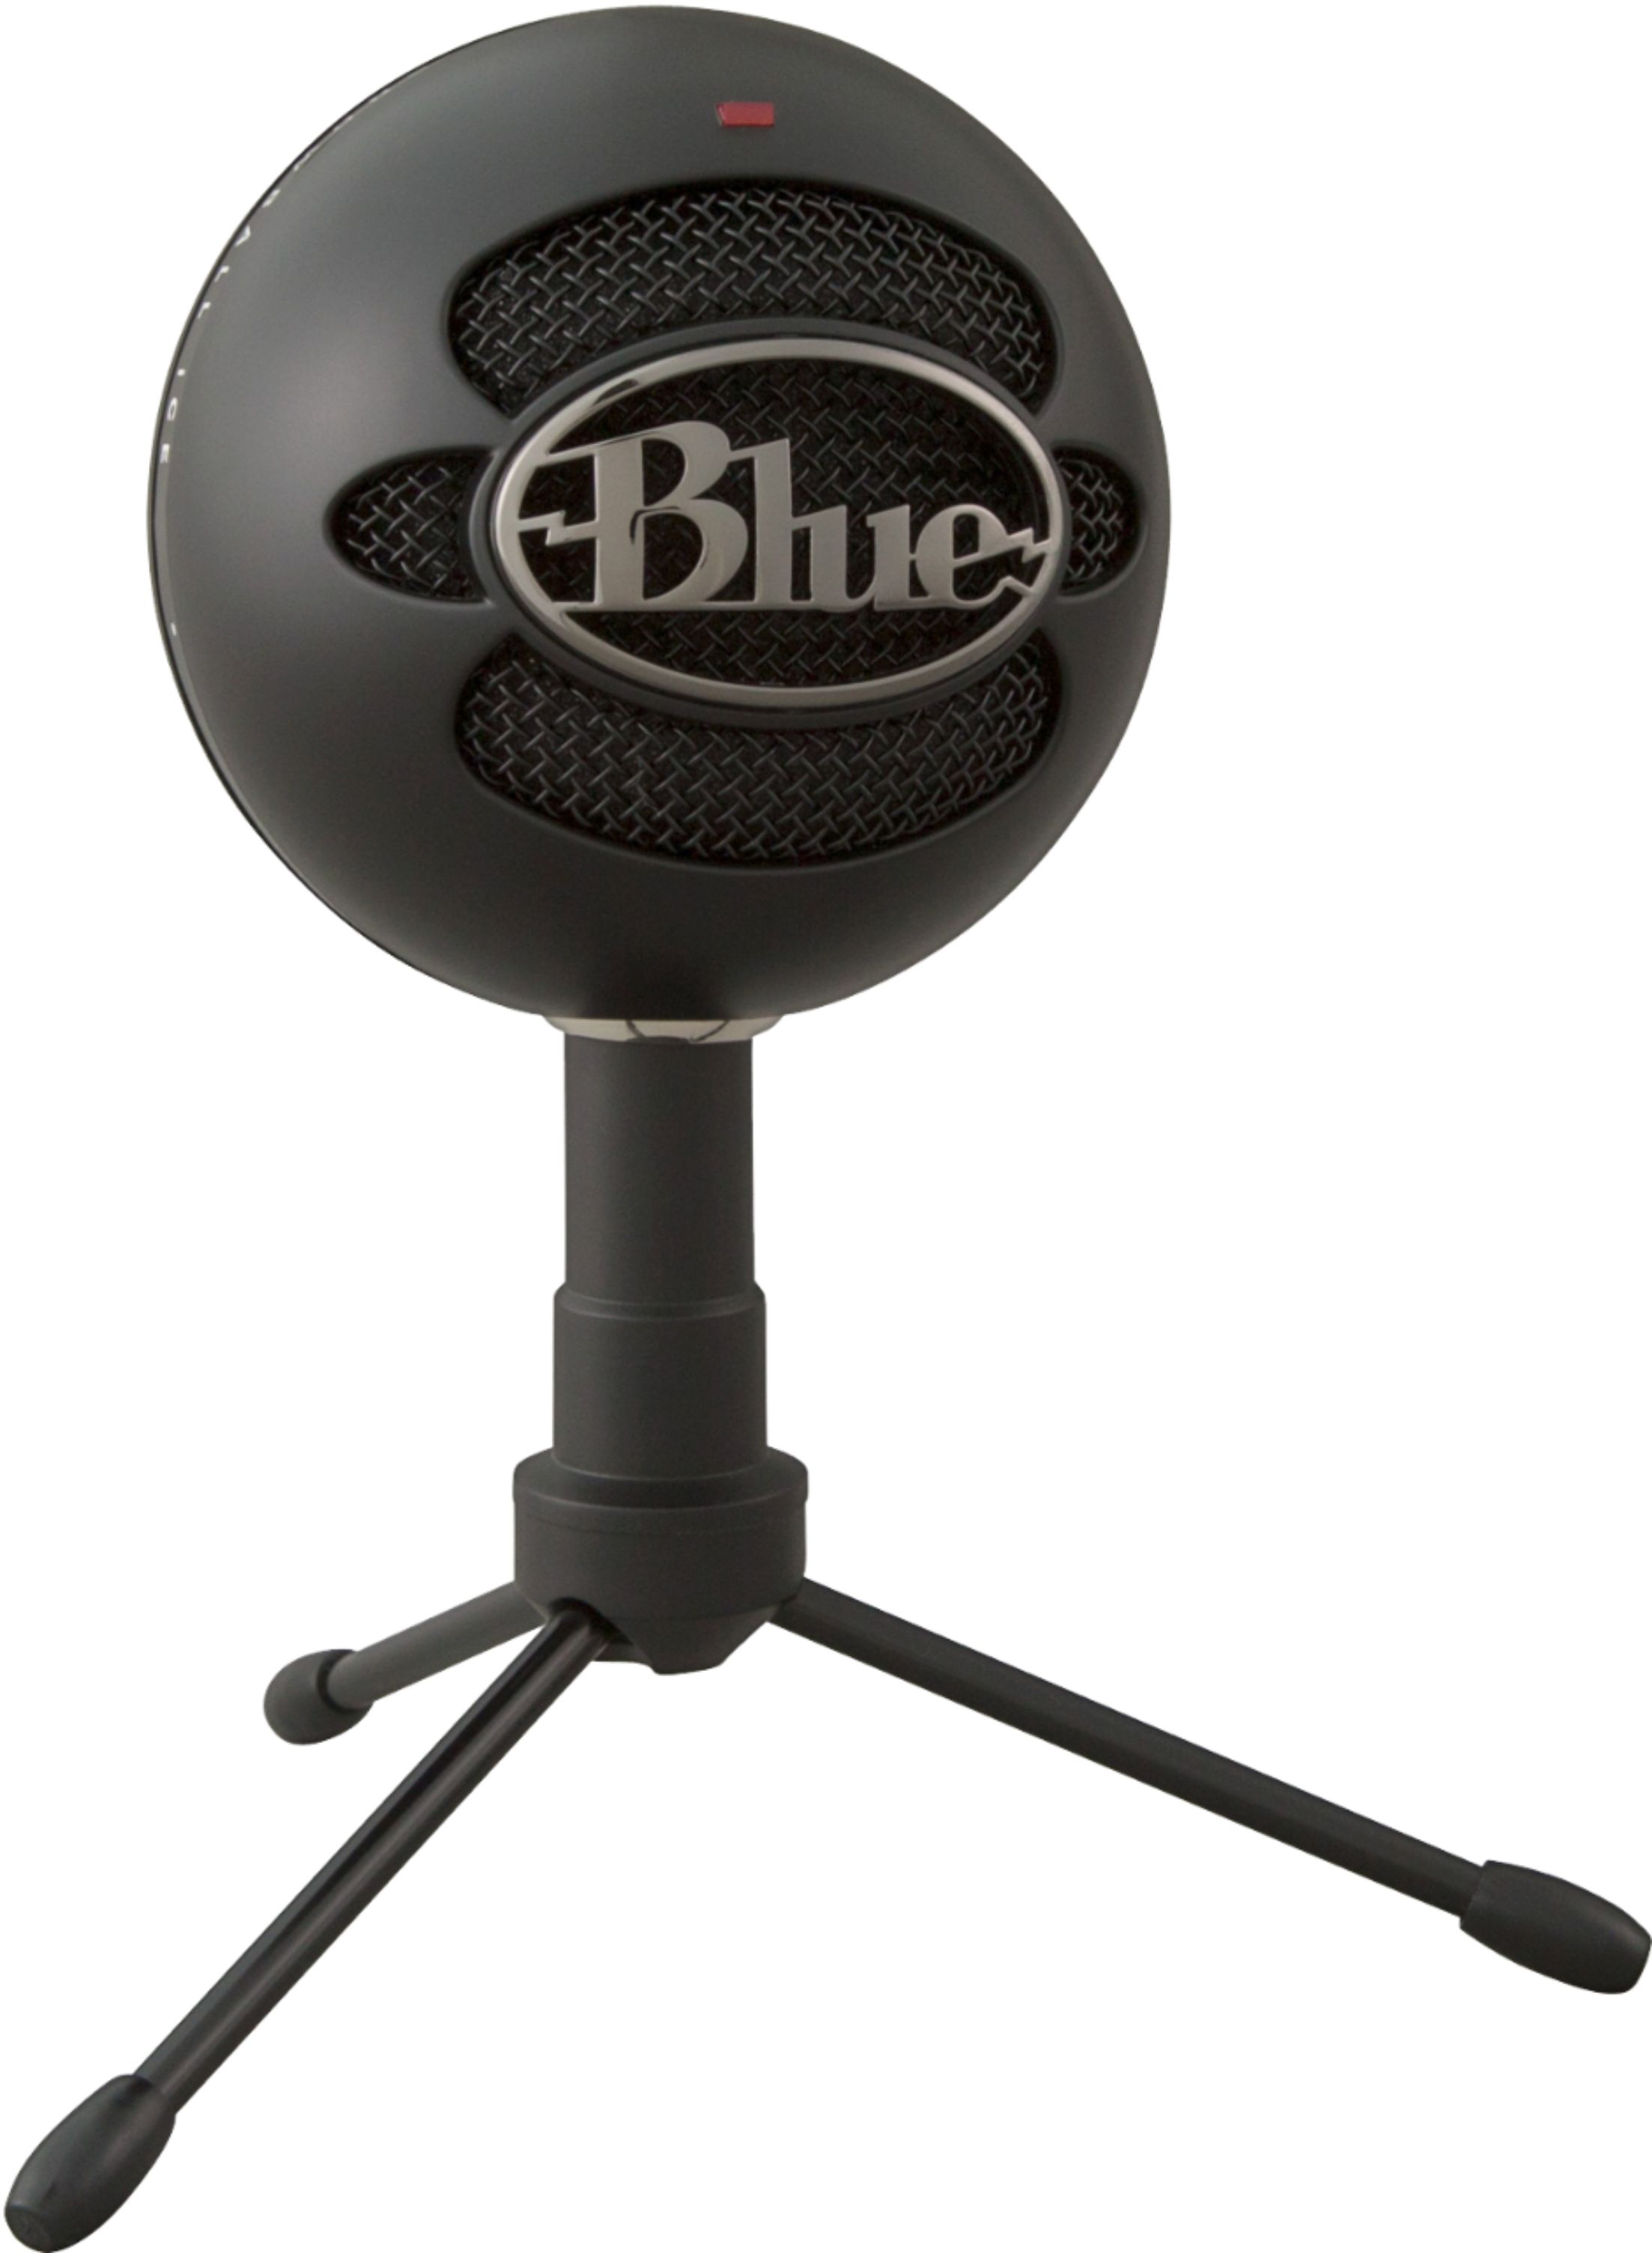 Angle View: Blue Microphones - Snowball iCE USB Microphone + $20 Ubisoft Discount Code